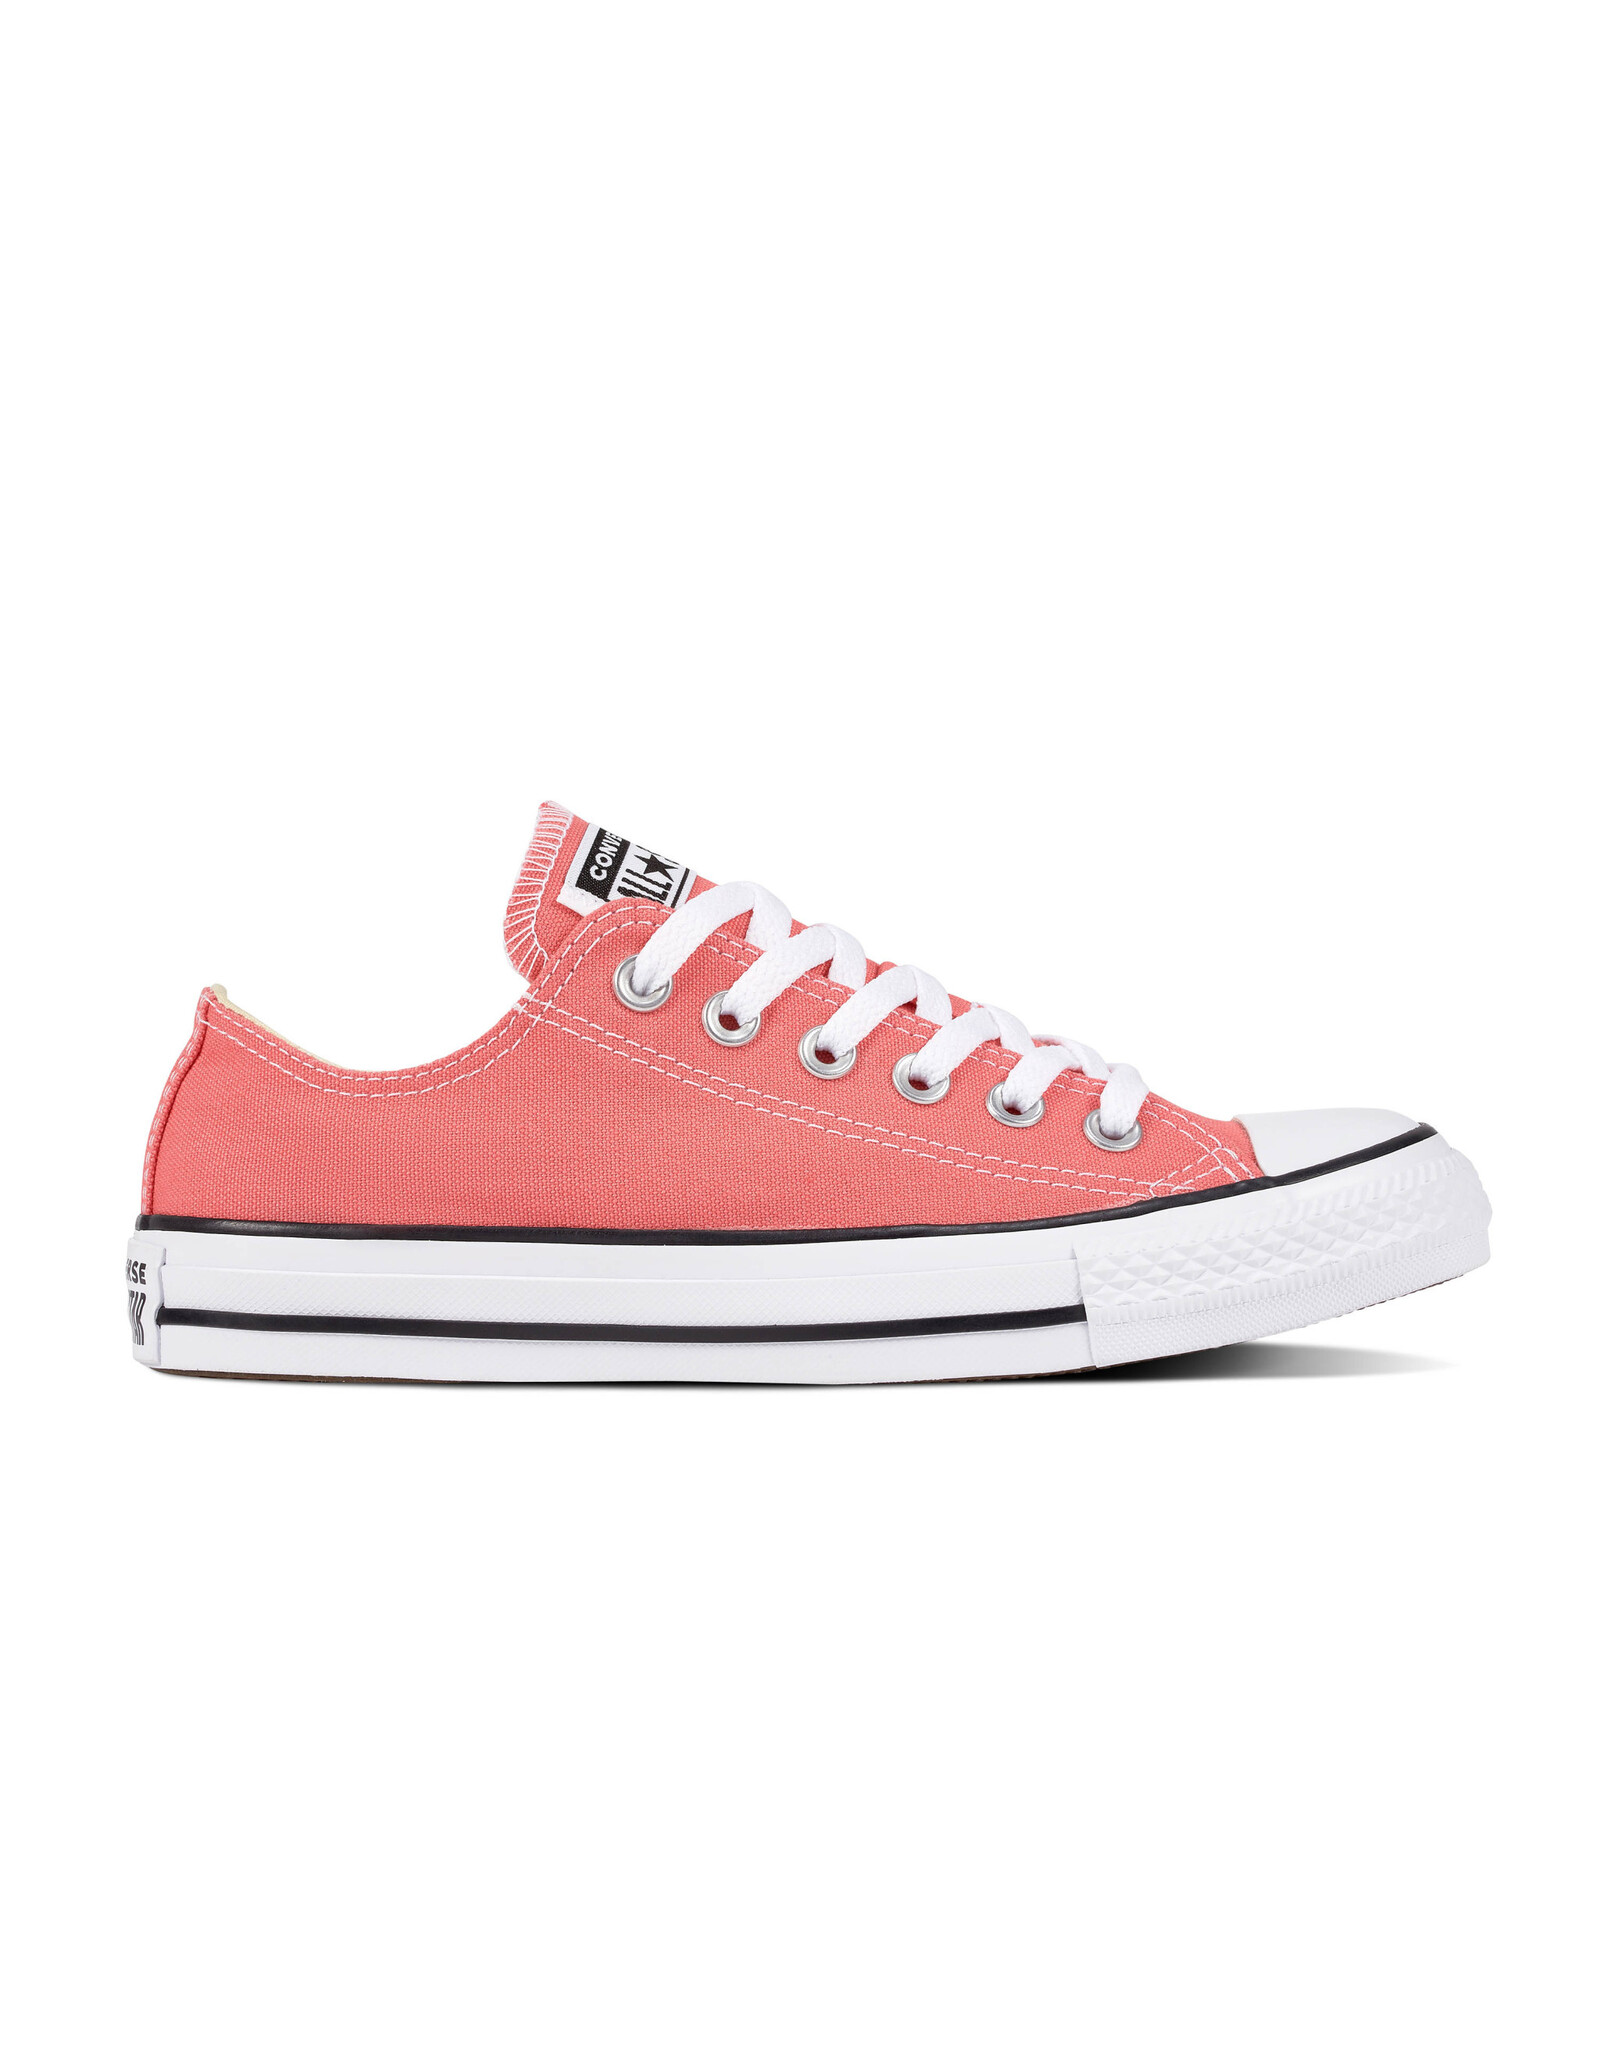 CHUCK TAYLOR OX PUNCH CORAL C12PUC-161421C